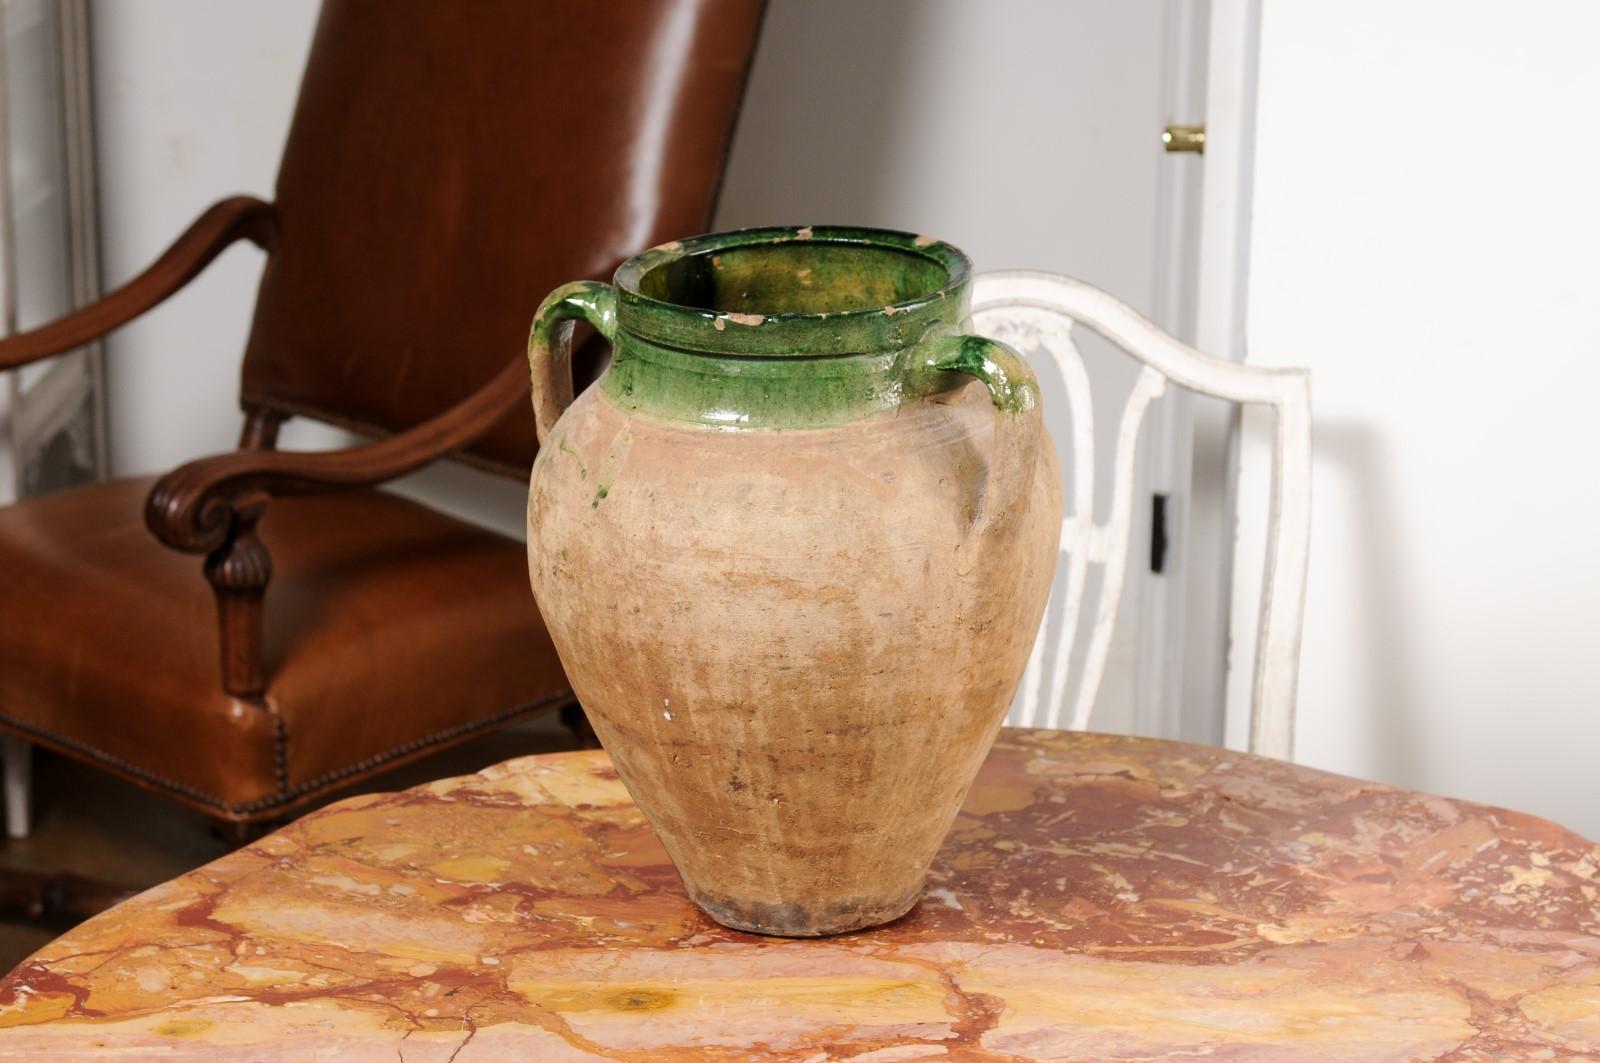 English Rustic 1930s Terracotta Olive Oil Jar Circa 1930 with Green Glazed Top For Sale 3